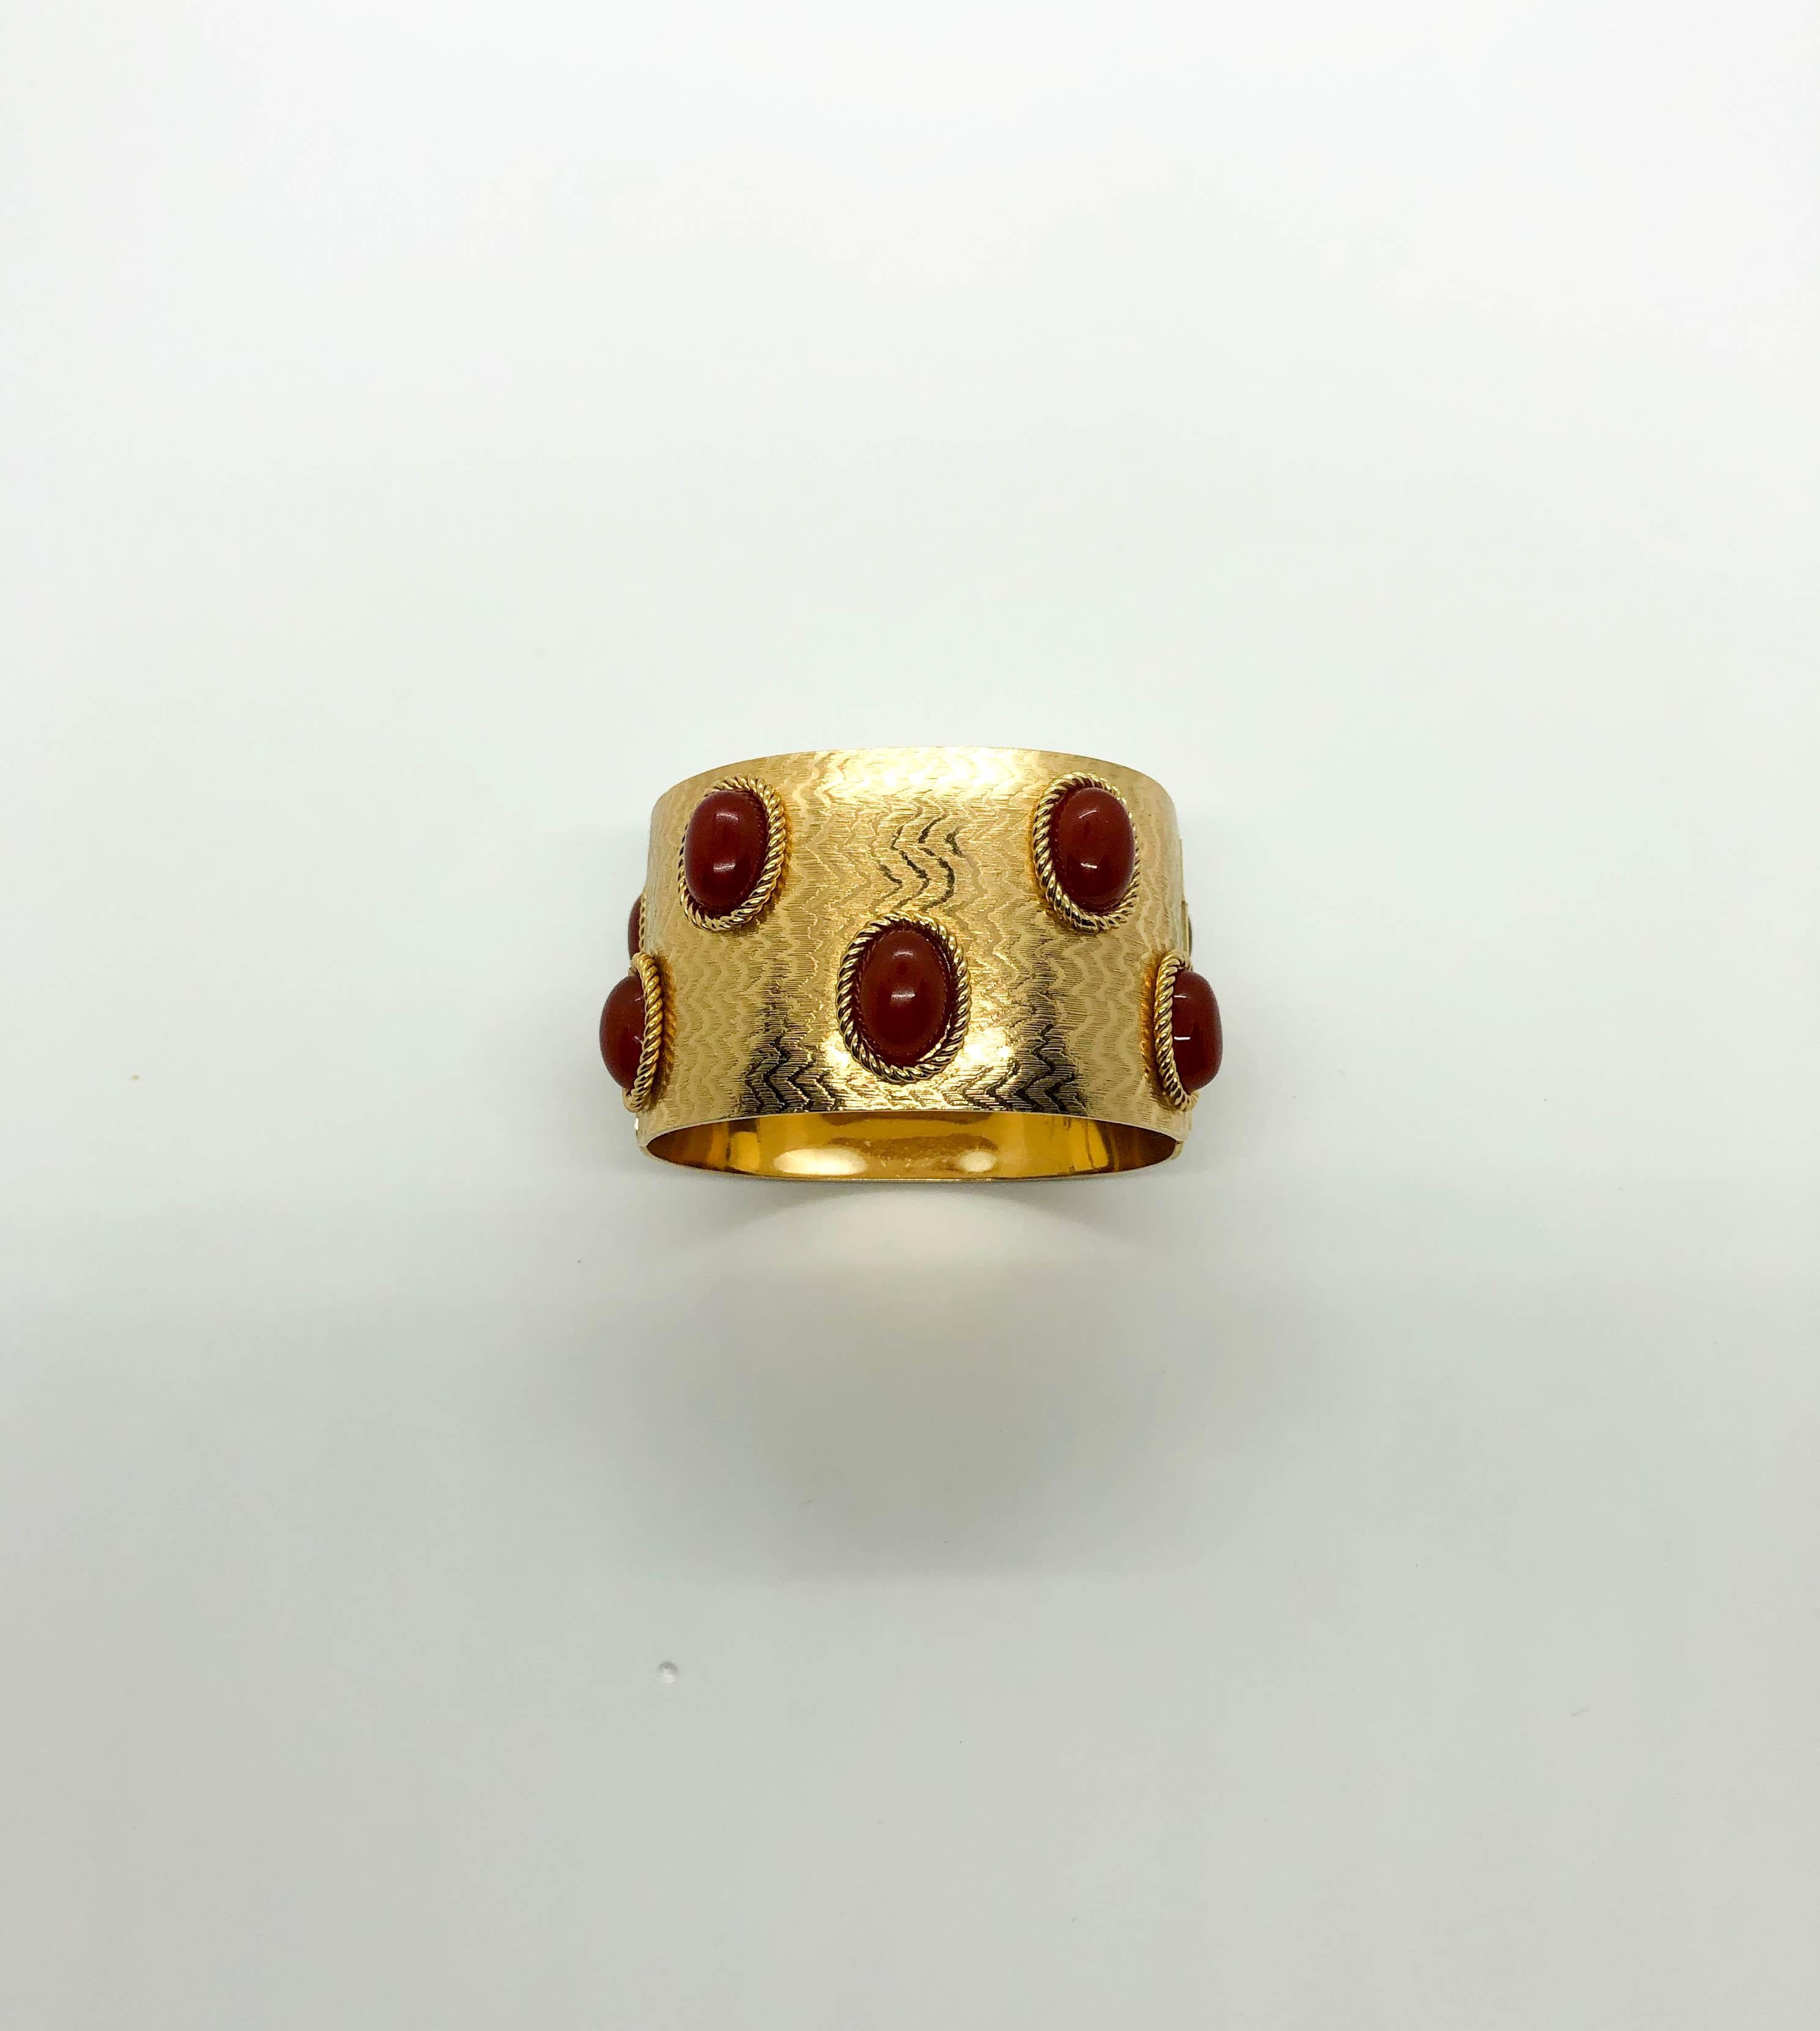 1968 Dior Gold-Plated Cuff Bracelet Embellished with Faux Amber Beads In Excellent Condition For Sale In London, Chelsea